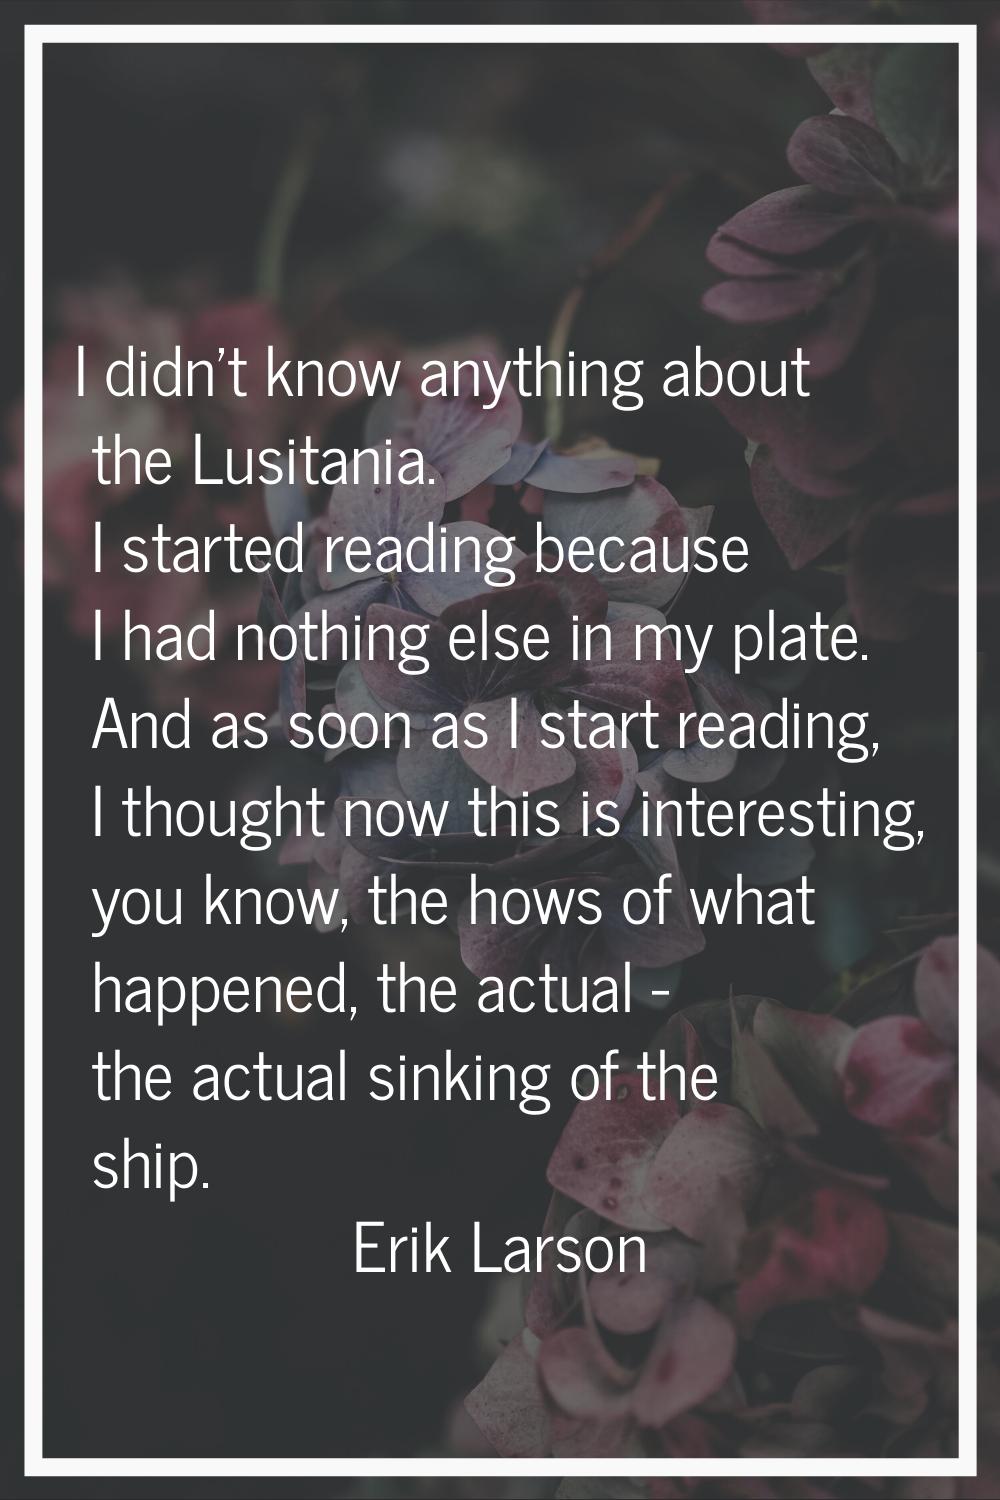 I didn't know anything about the Lusitania. I started reading because I had nothing else in my plat